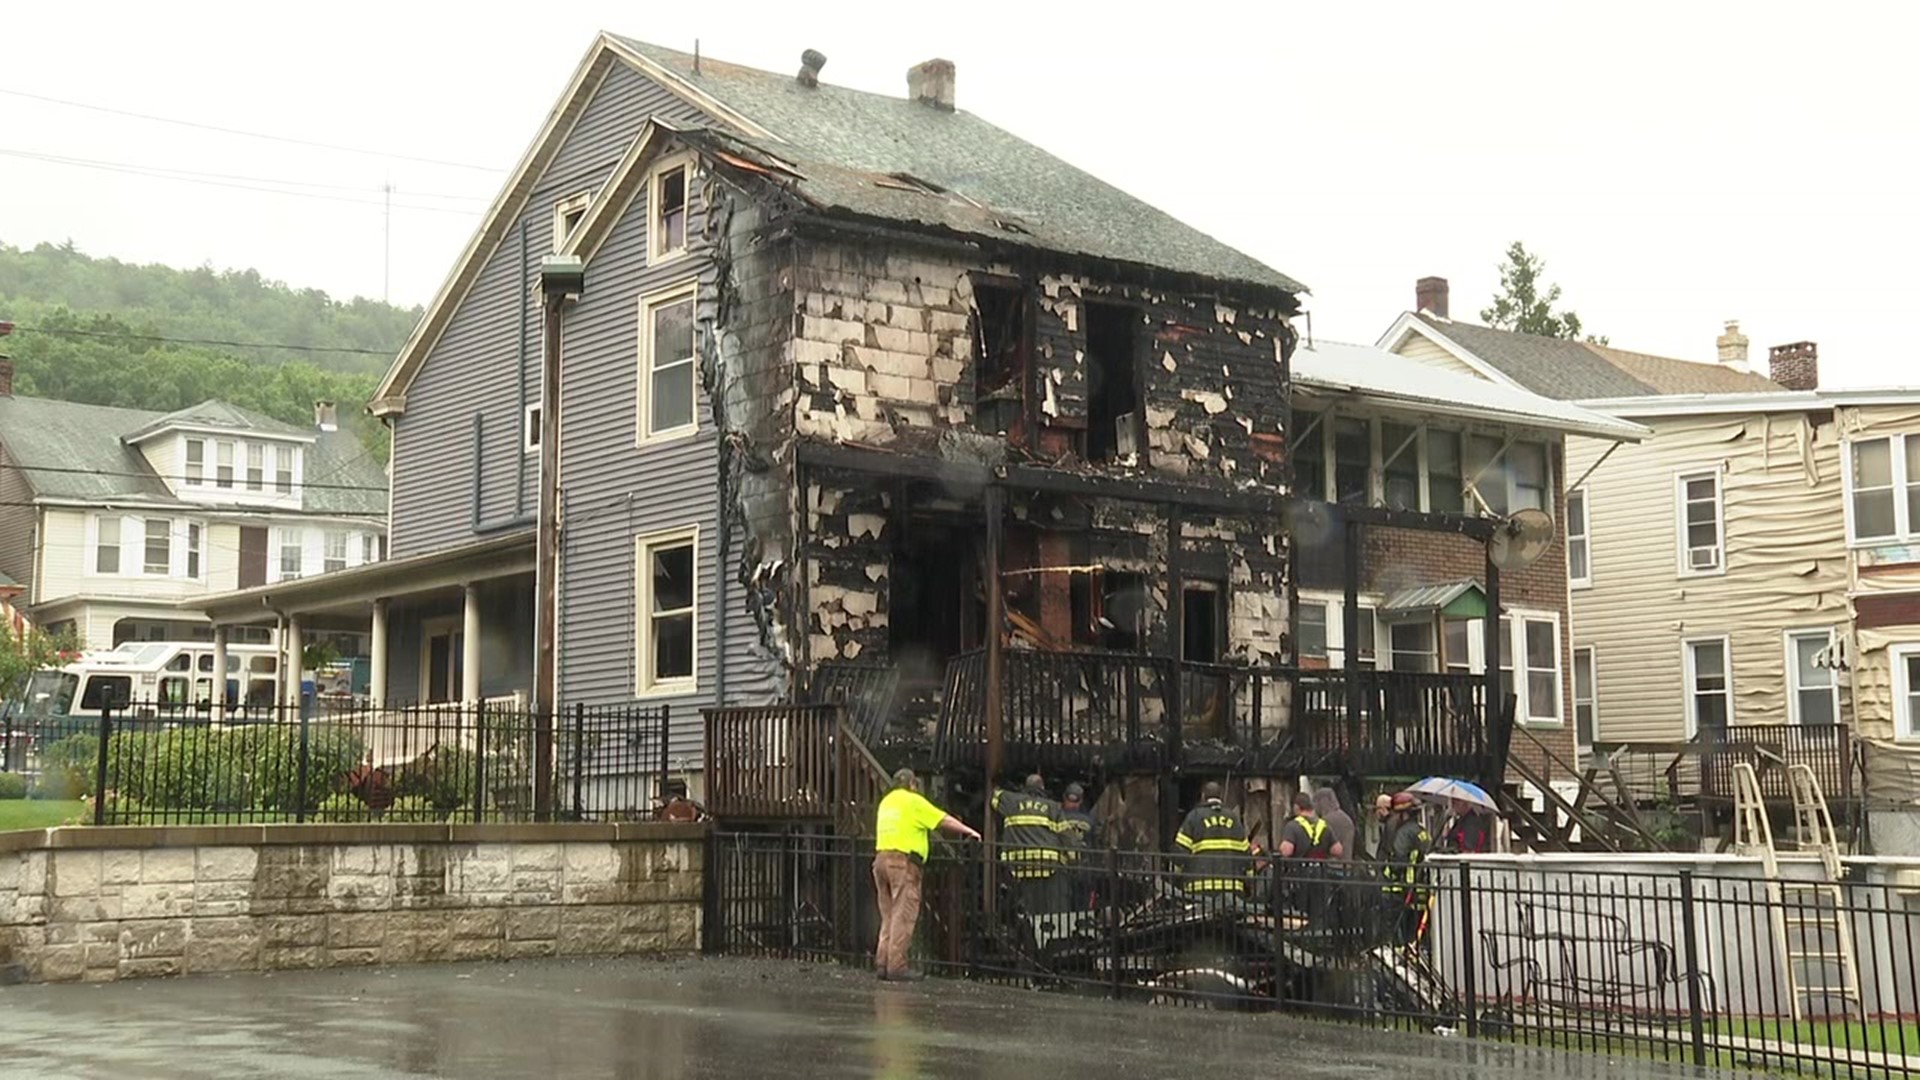 One family is without a home after a fire Tuesday morning in one Schuylkill County community.